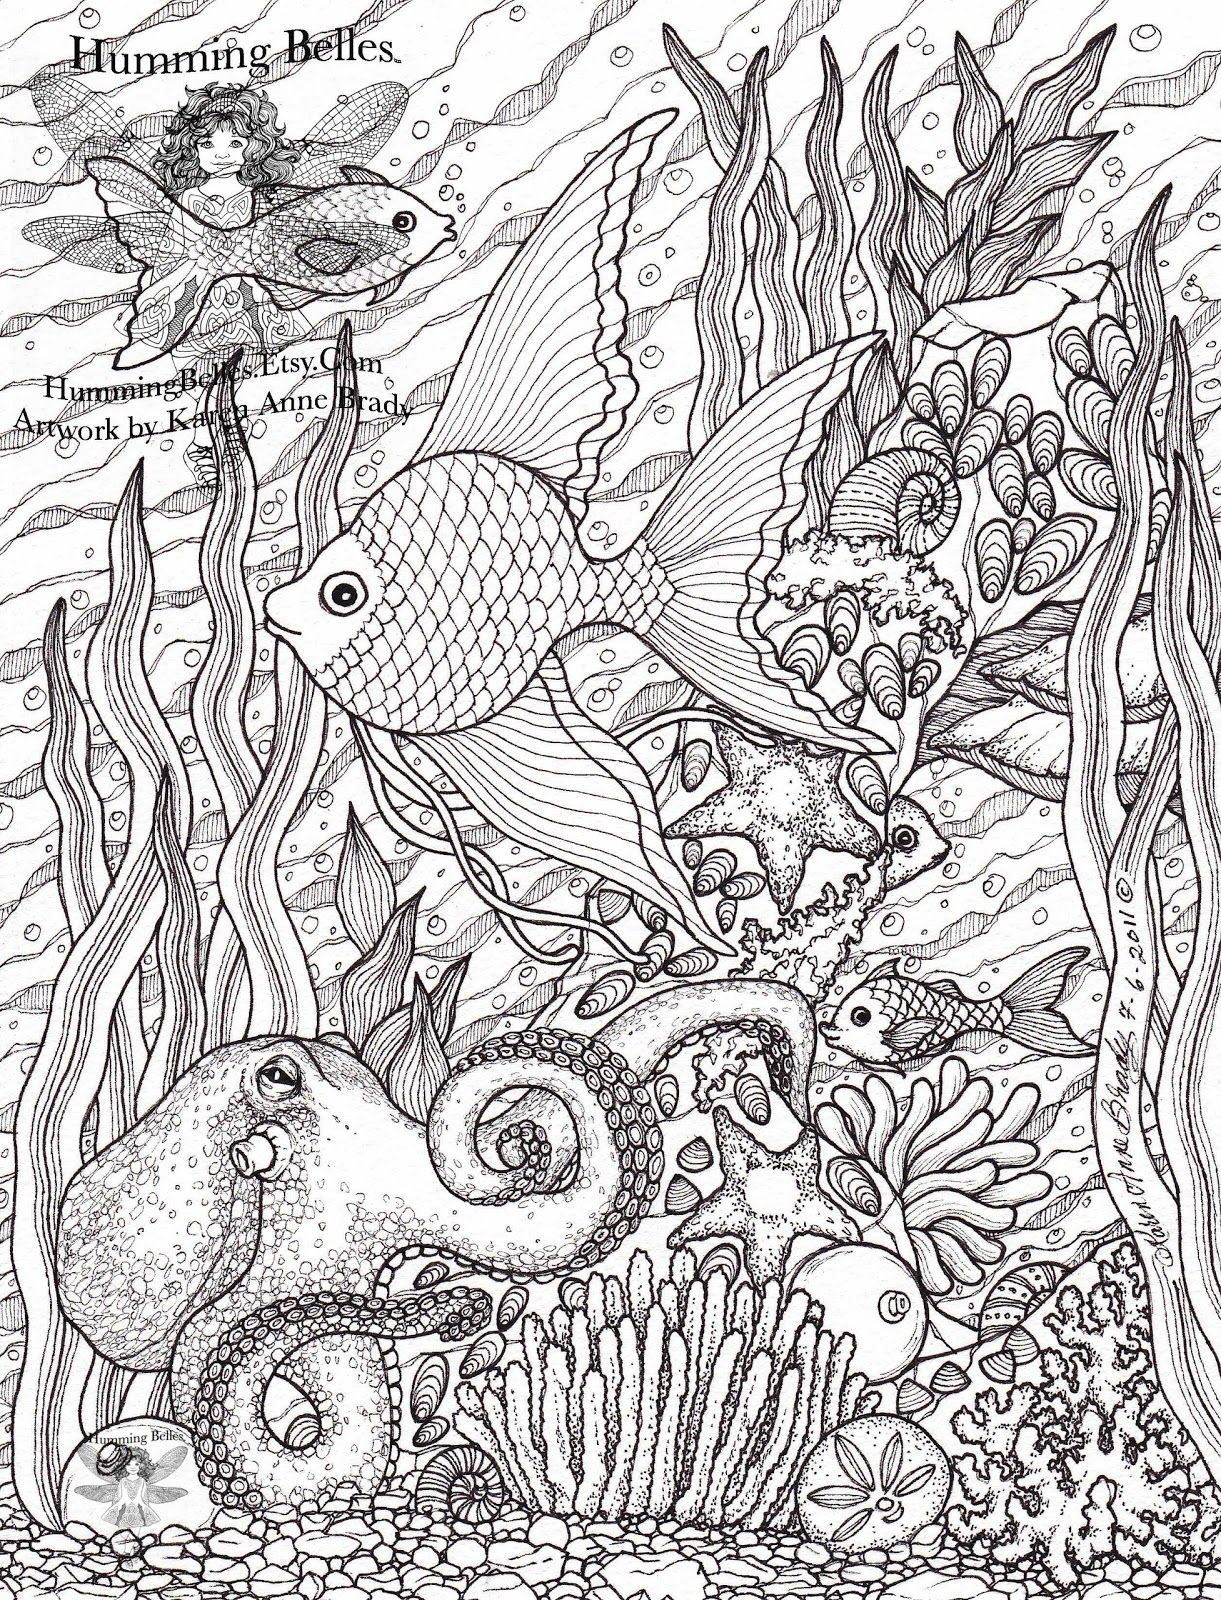 Humming Belles".....: New! Undersea Illustrations and Coloring Pages